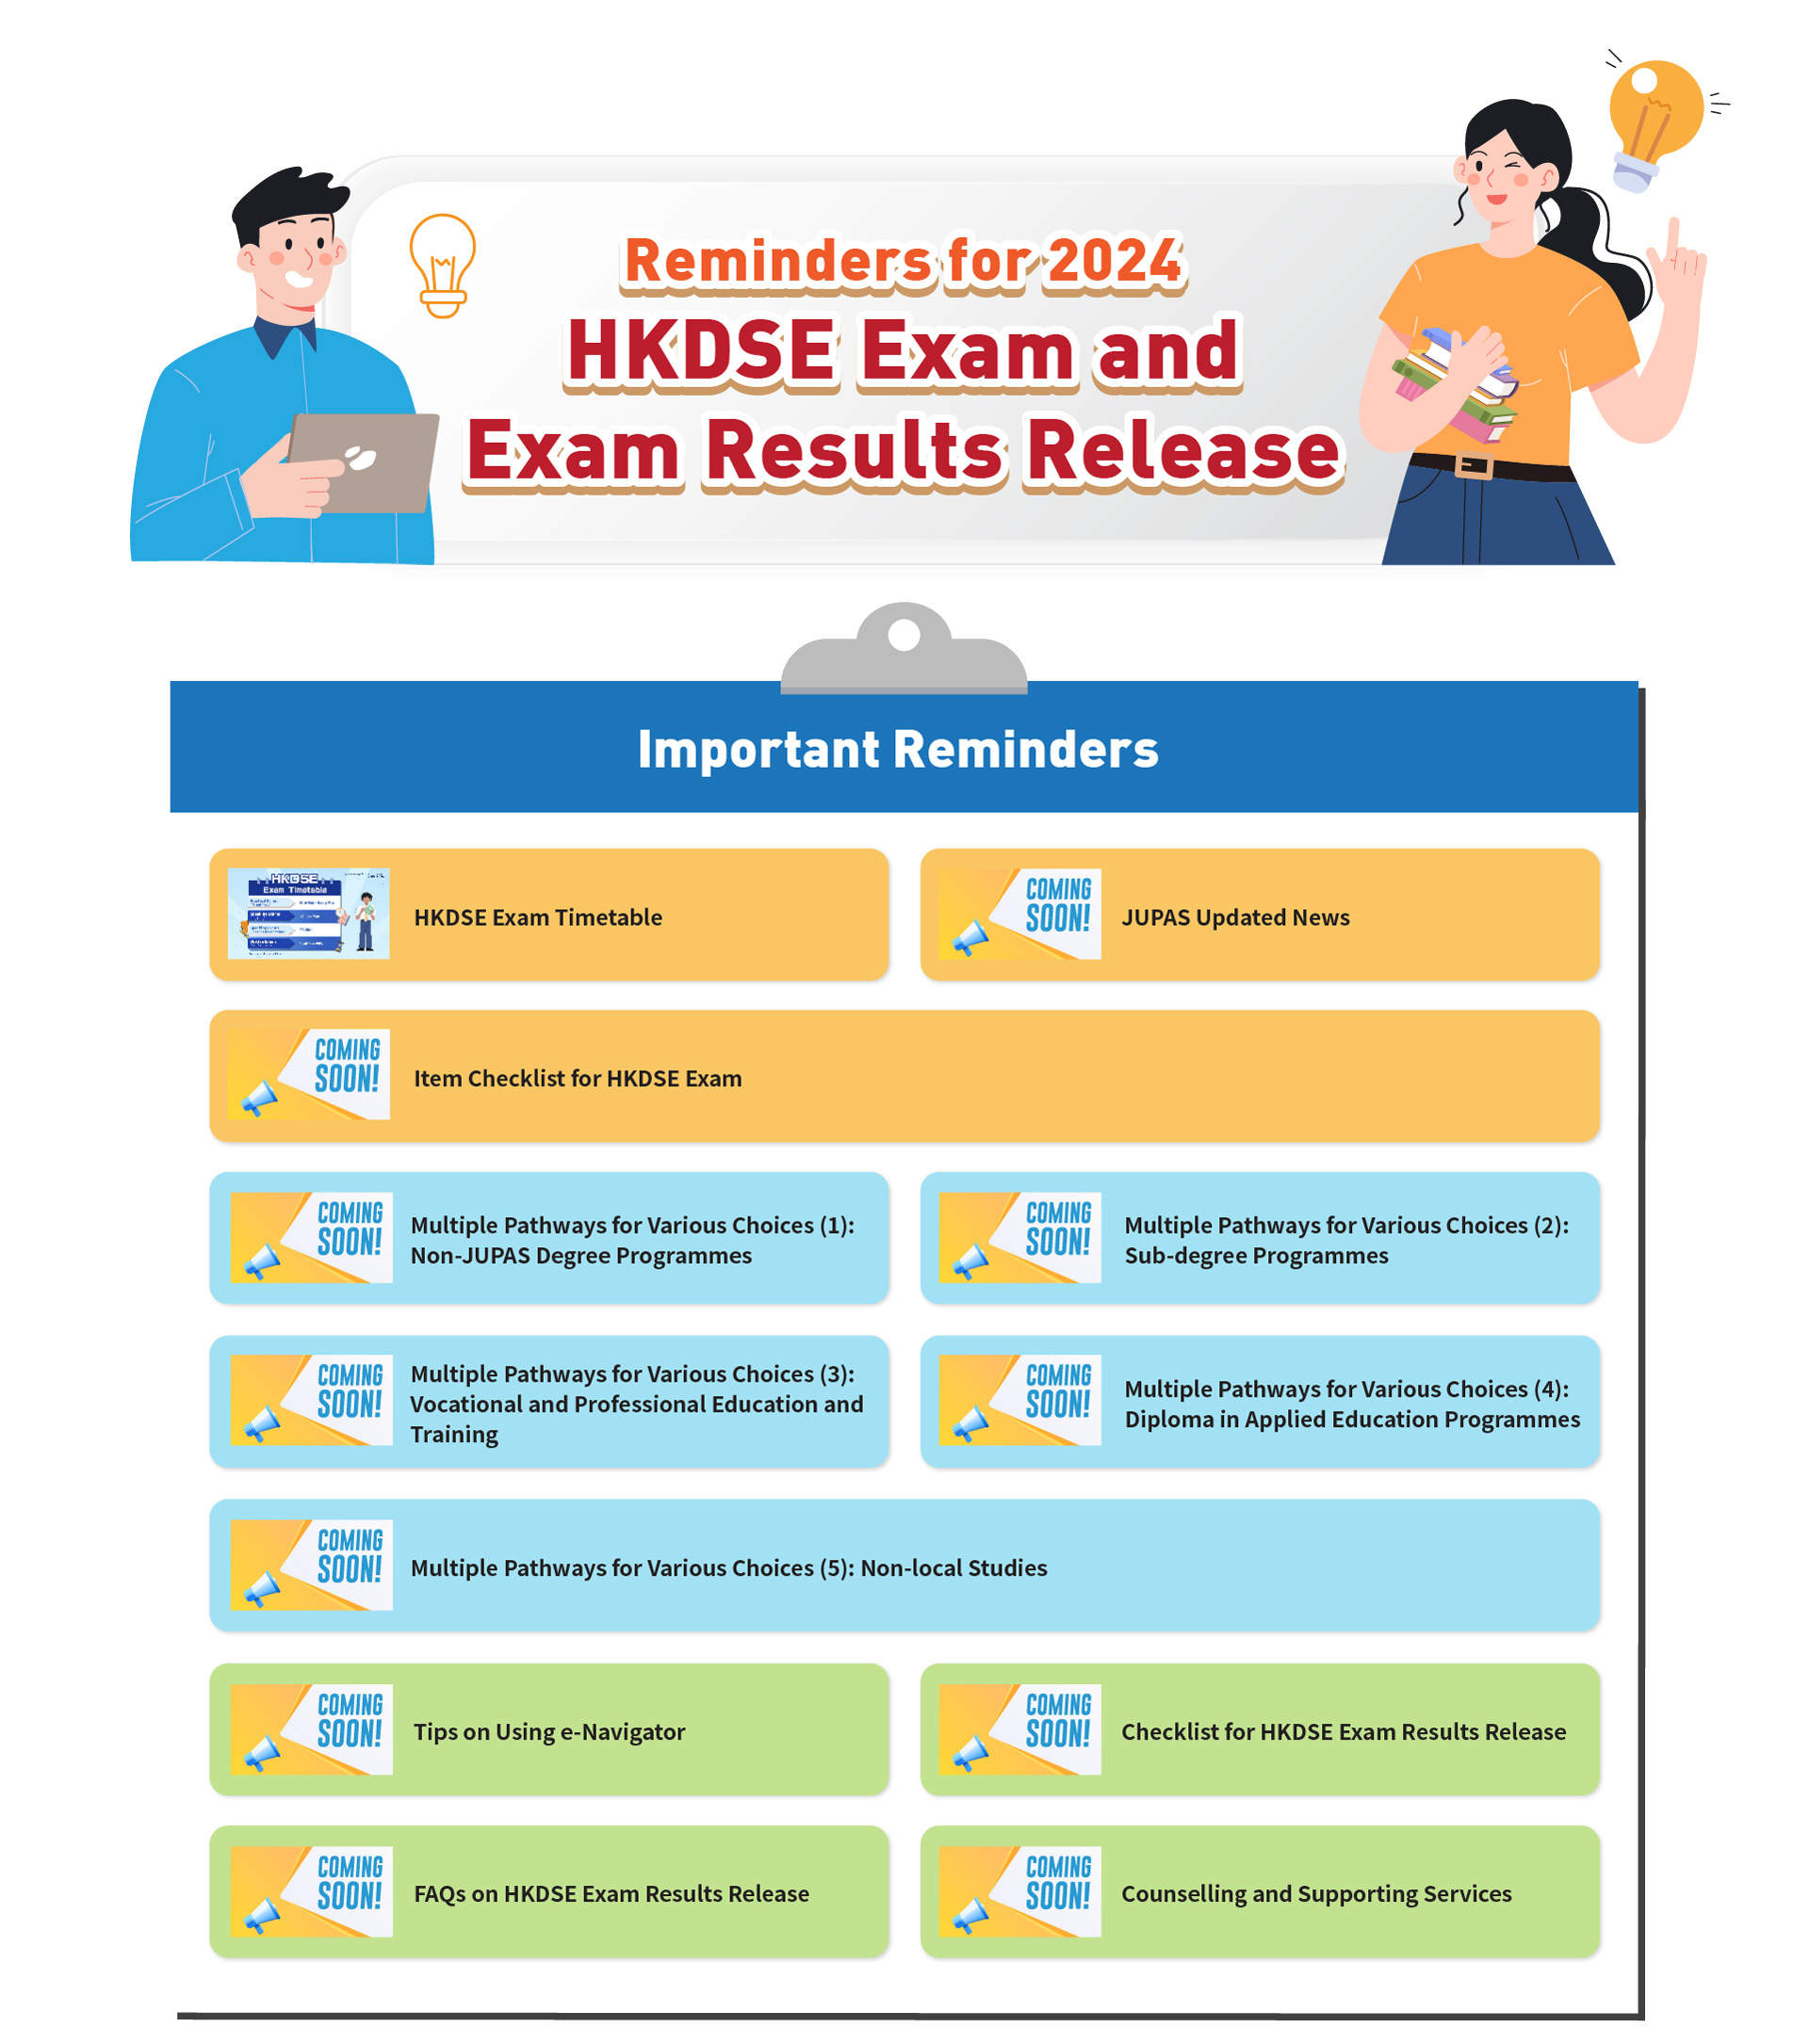 Reminders for 2023 HKDSE Exam and Exam Results Release